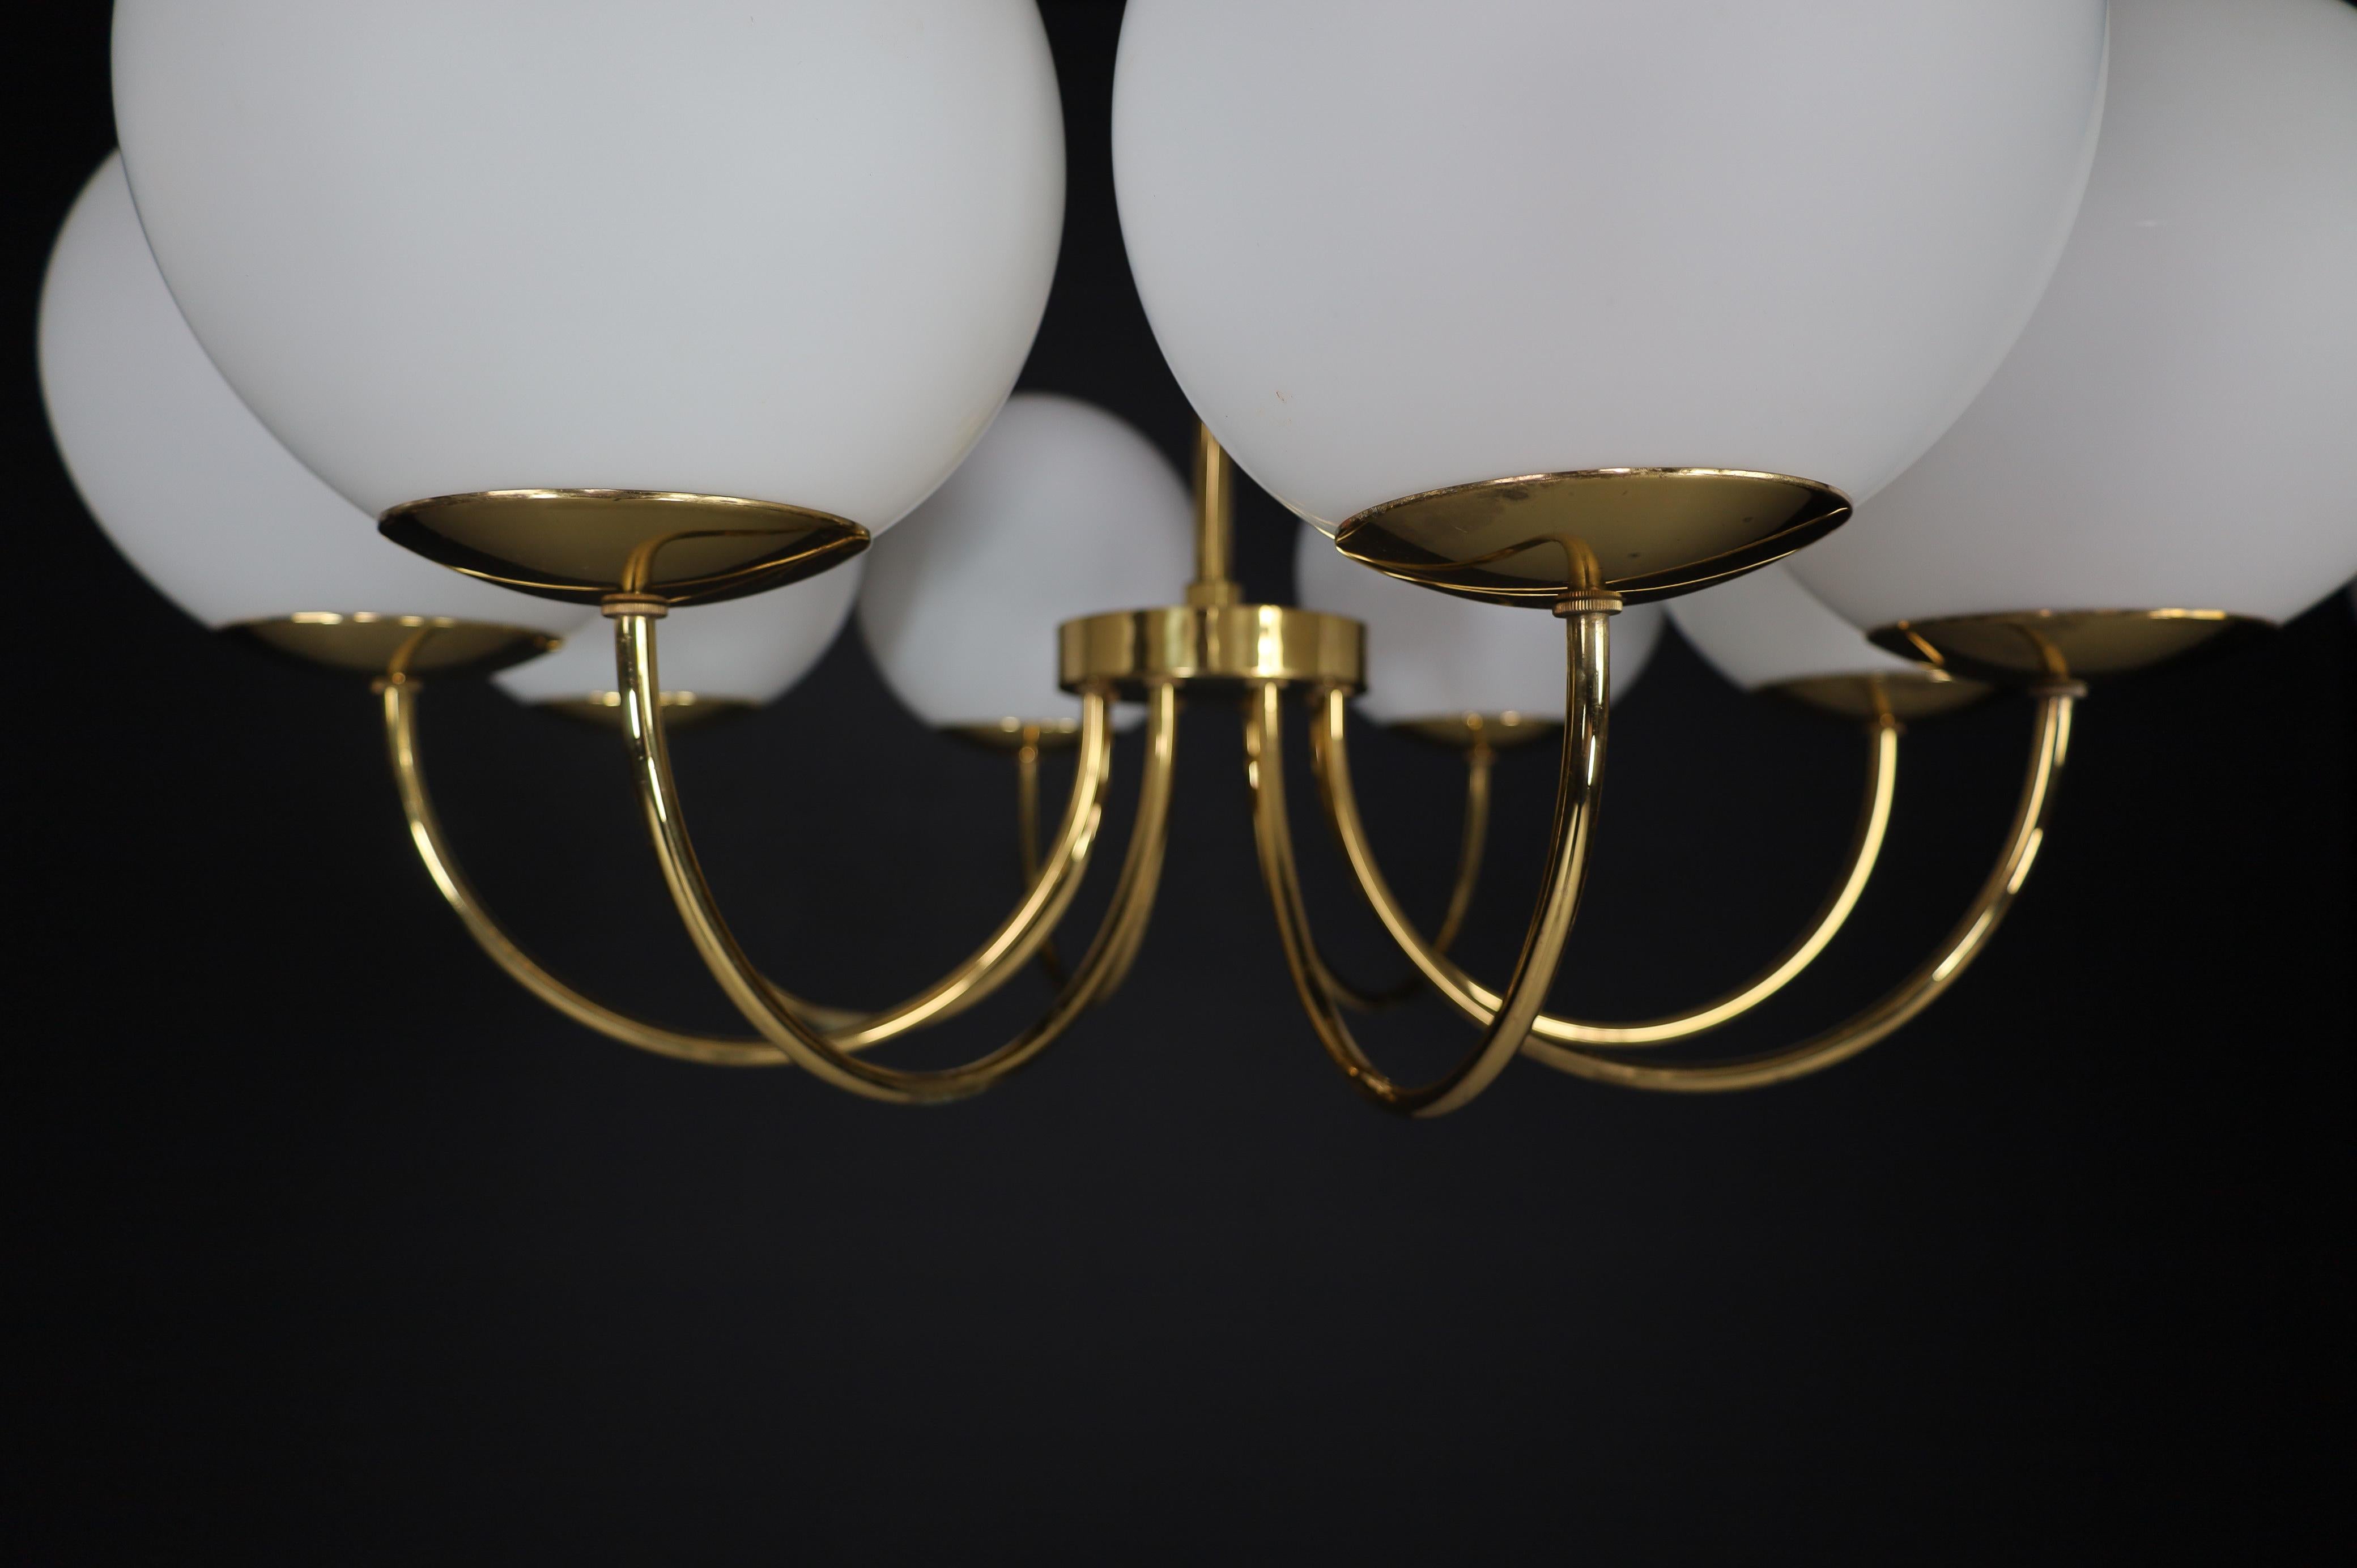 1 of 3 Elegant Chandeliers with Brass Fixture and Opaline Glass Globes, 1960s For Sale 3